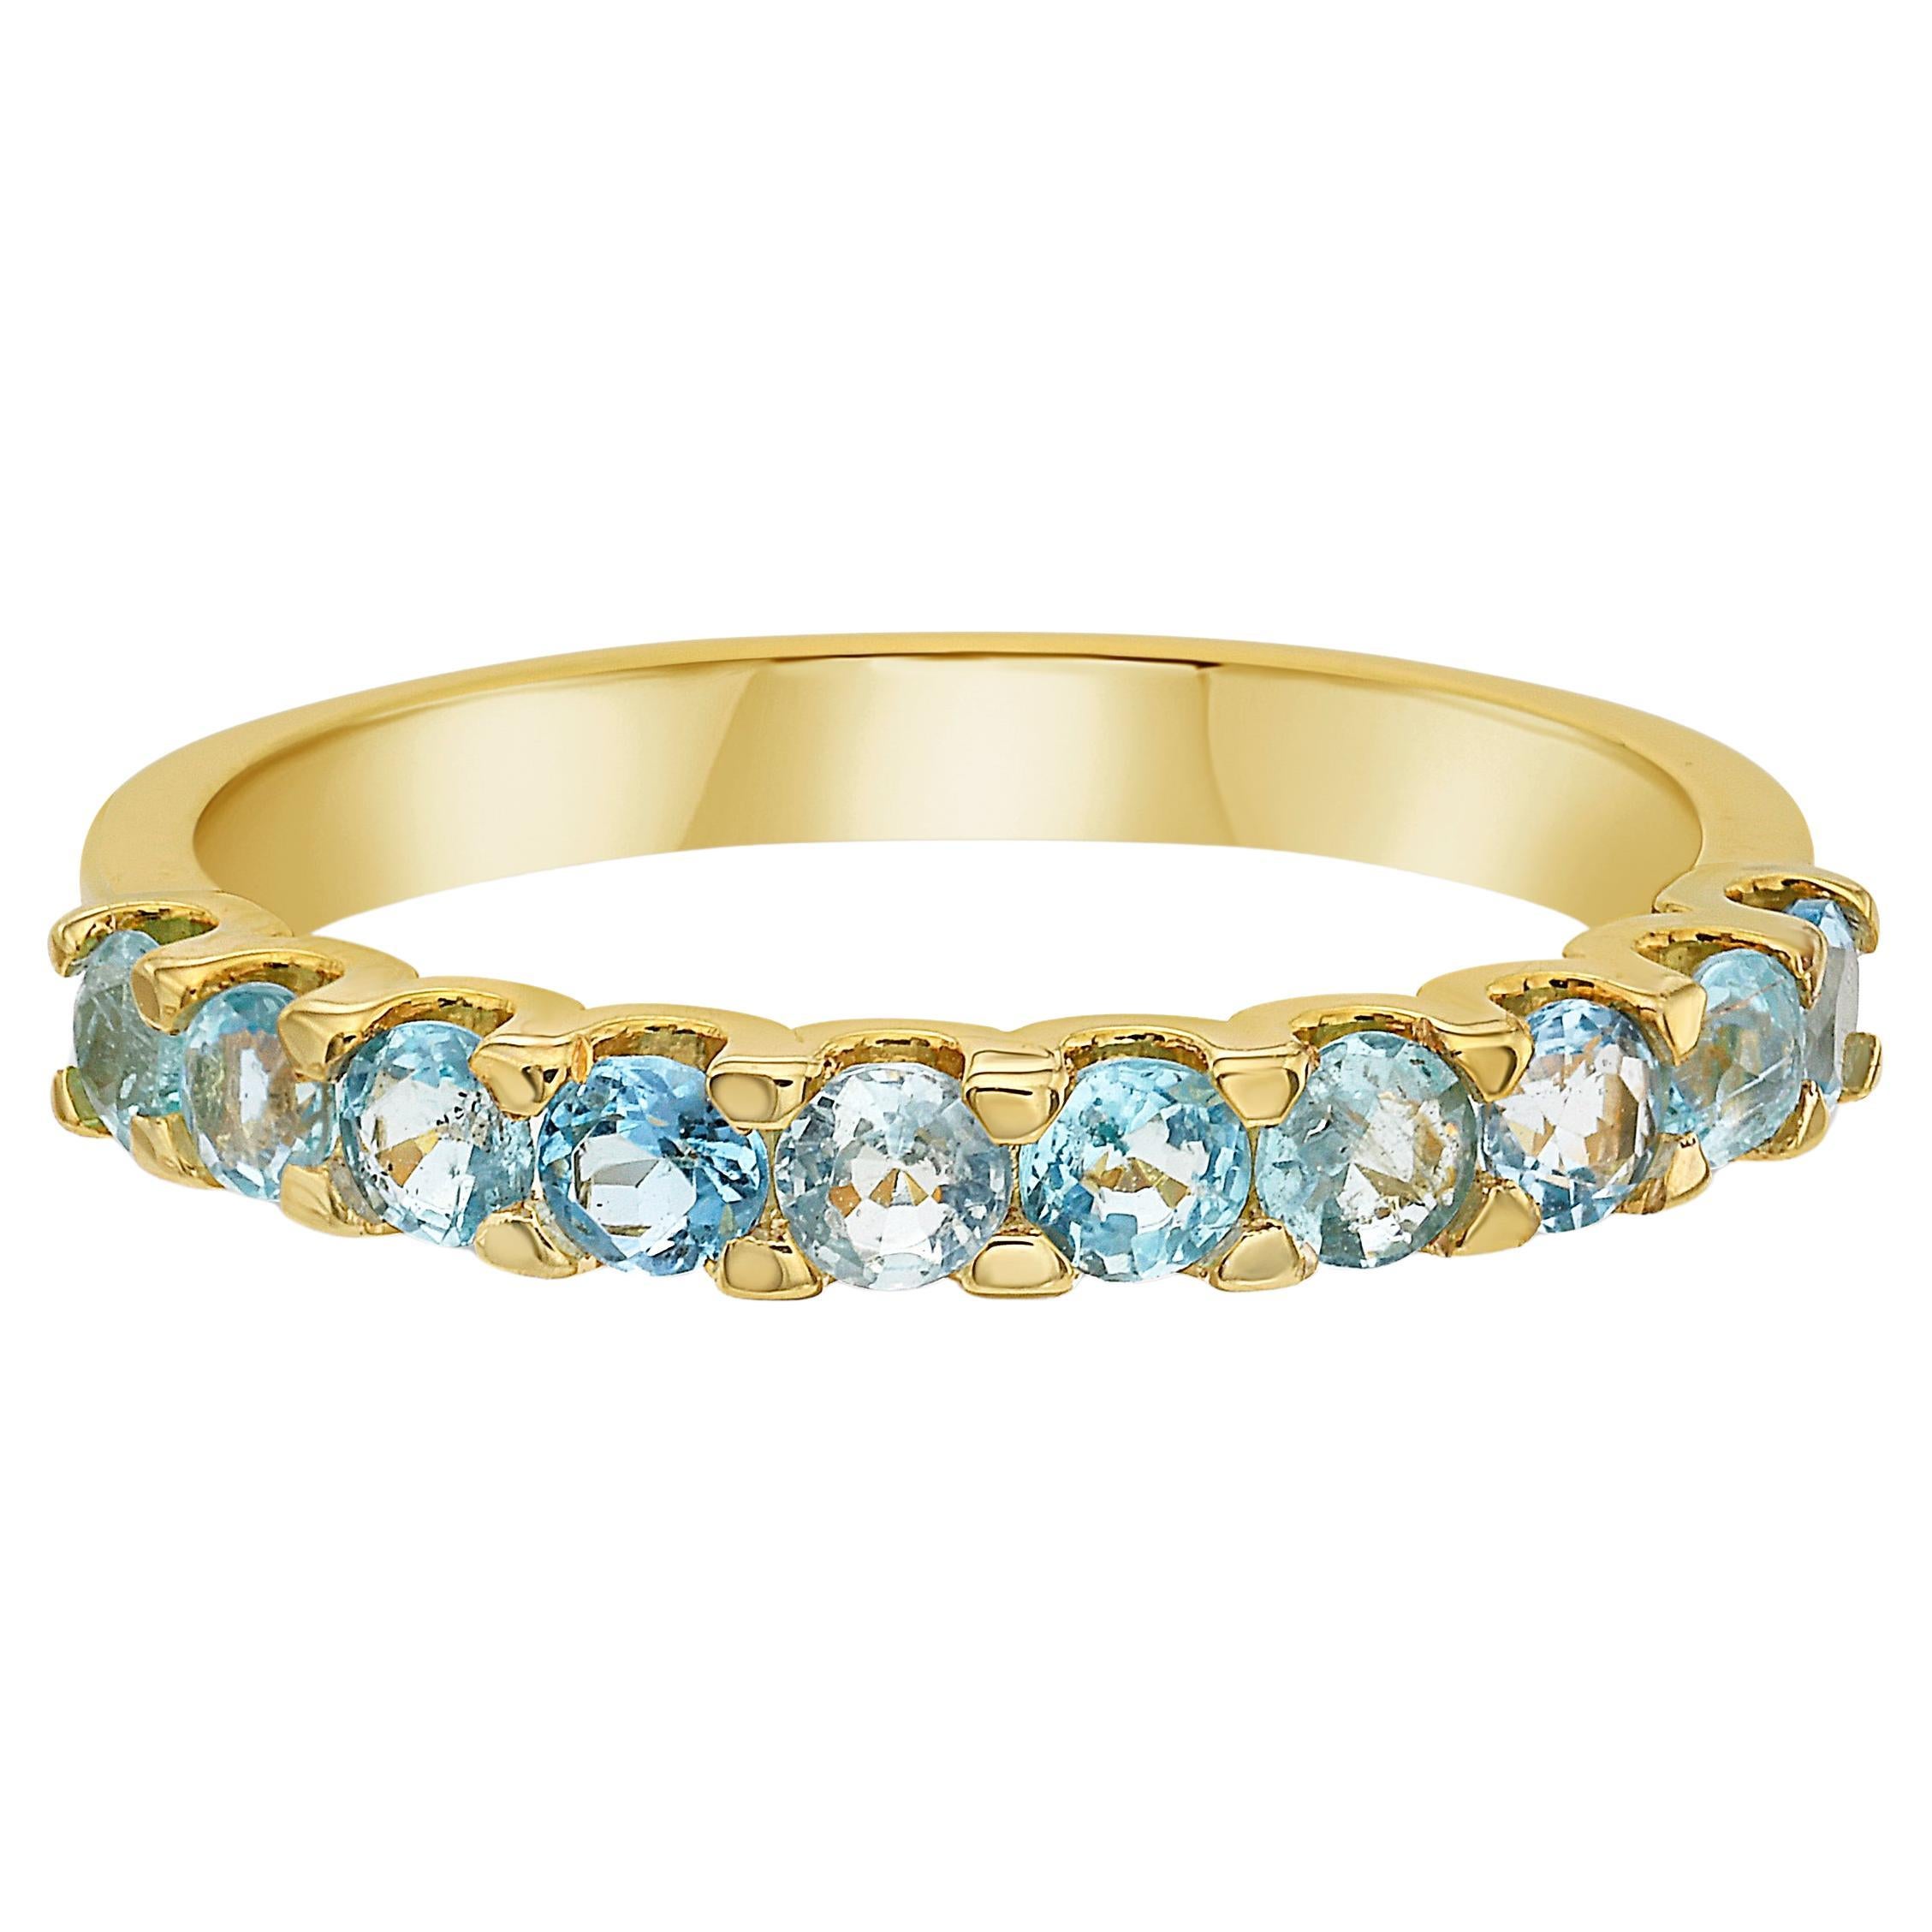 Indulge in pure luxury with our exquisite Paraíba Tourmaline Ring. Crafted with 18k yellow gold, this stackable ring features electric blue Paraíba tourmaline stones. The perfect statement piece for those who desire something unique and